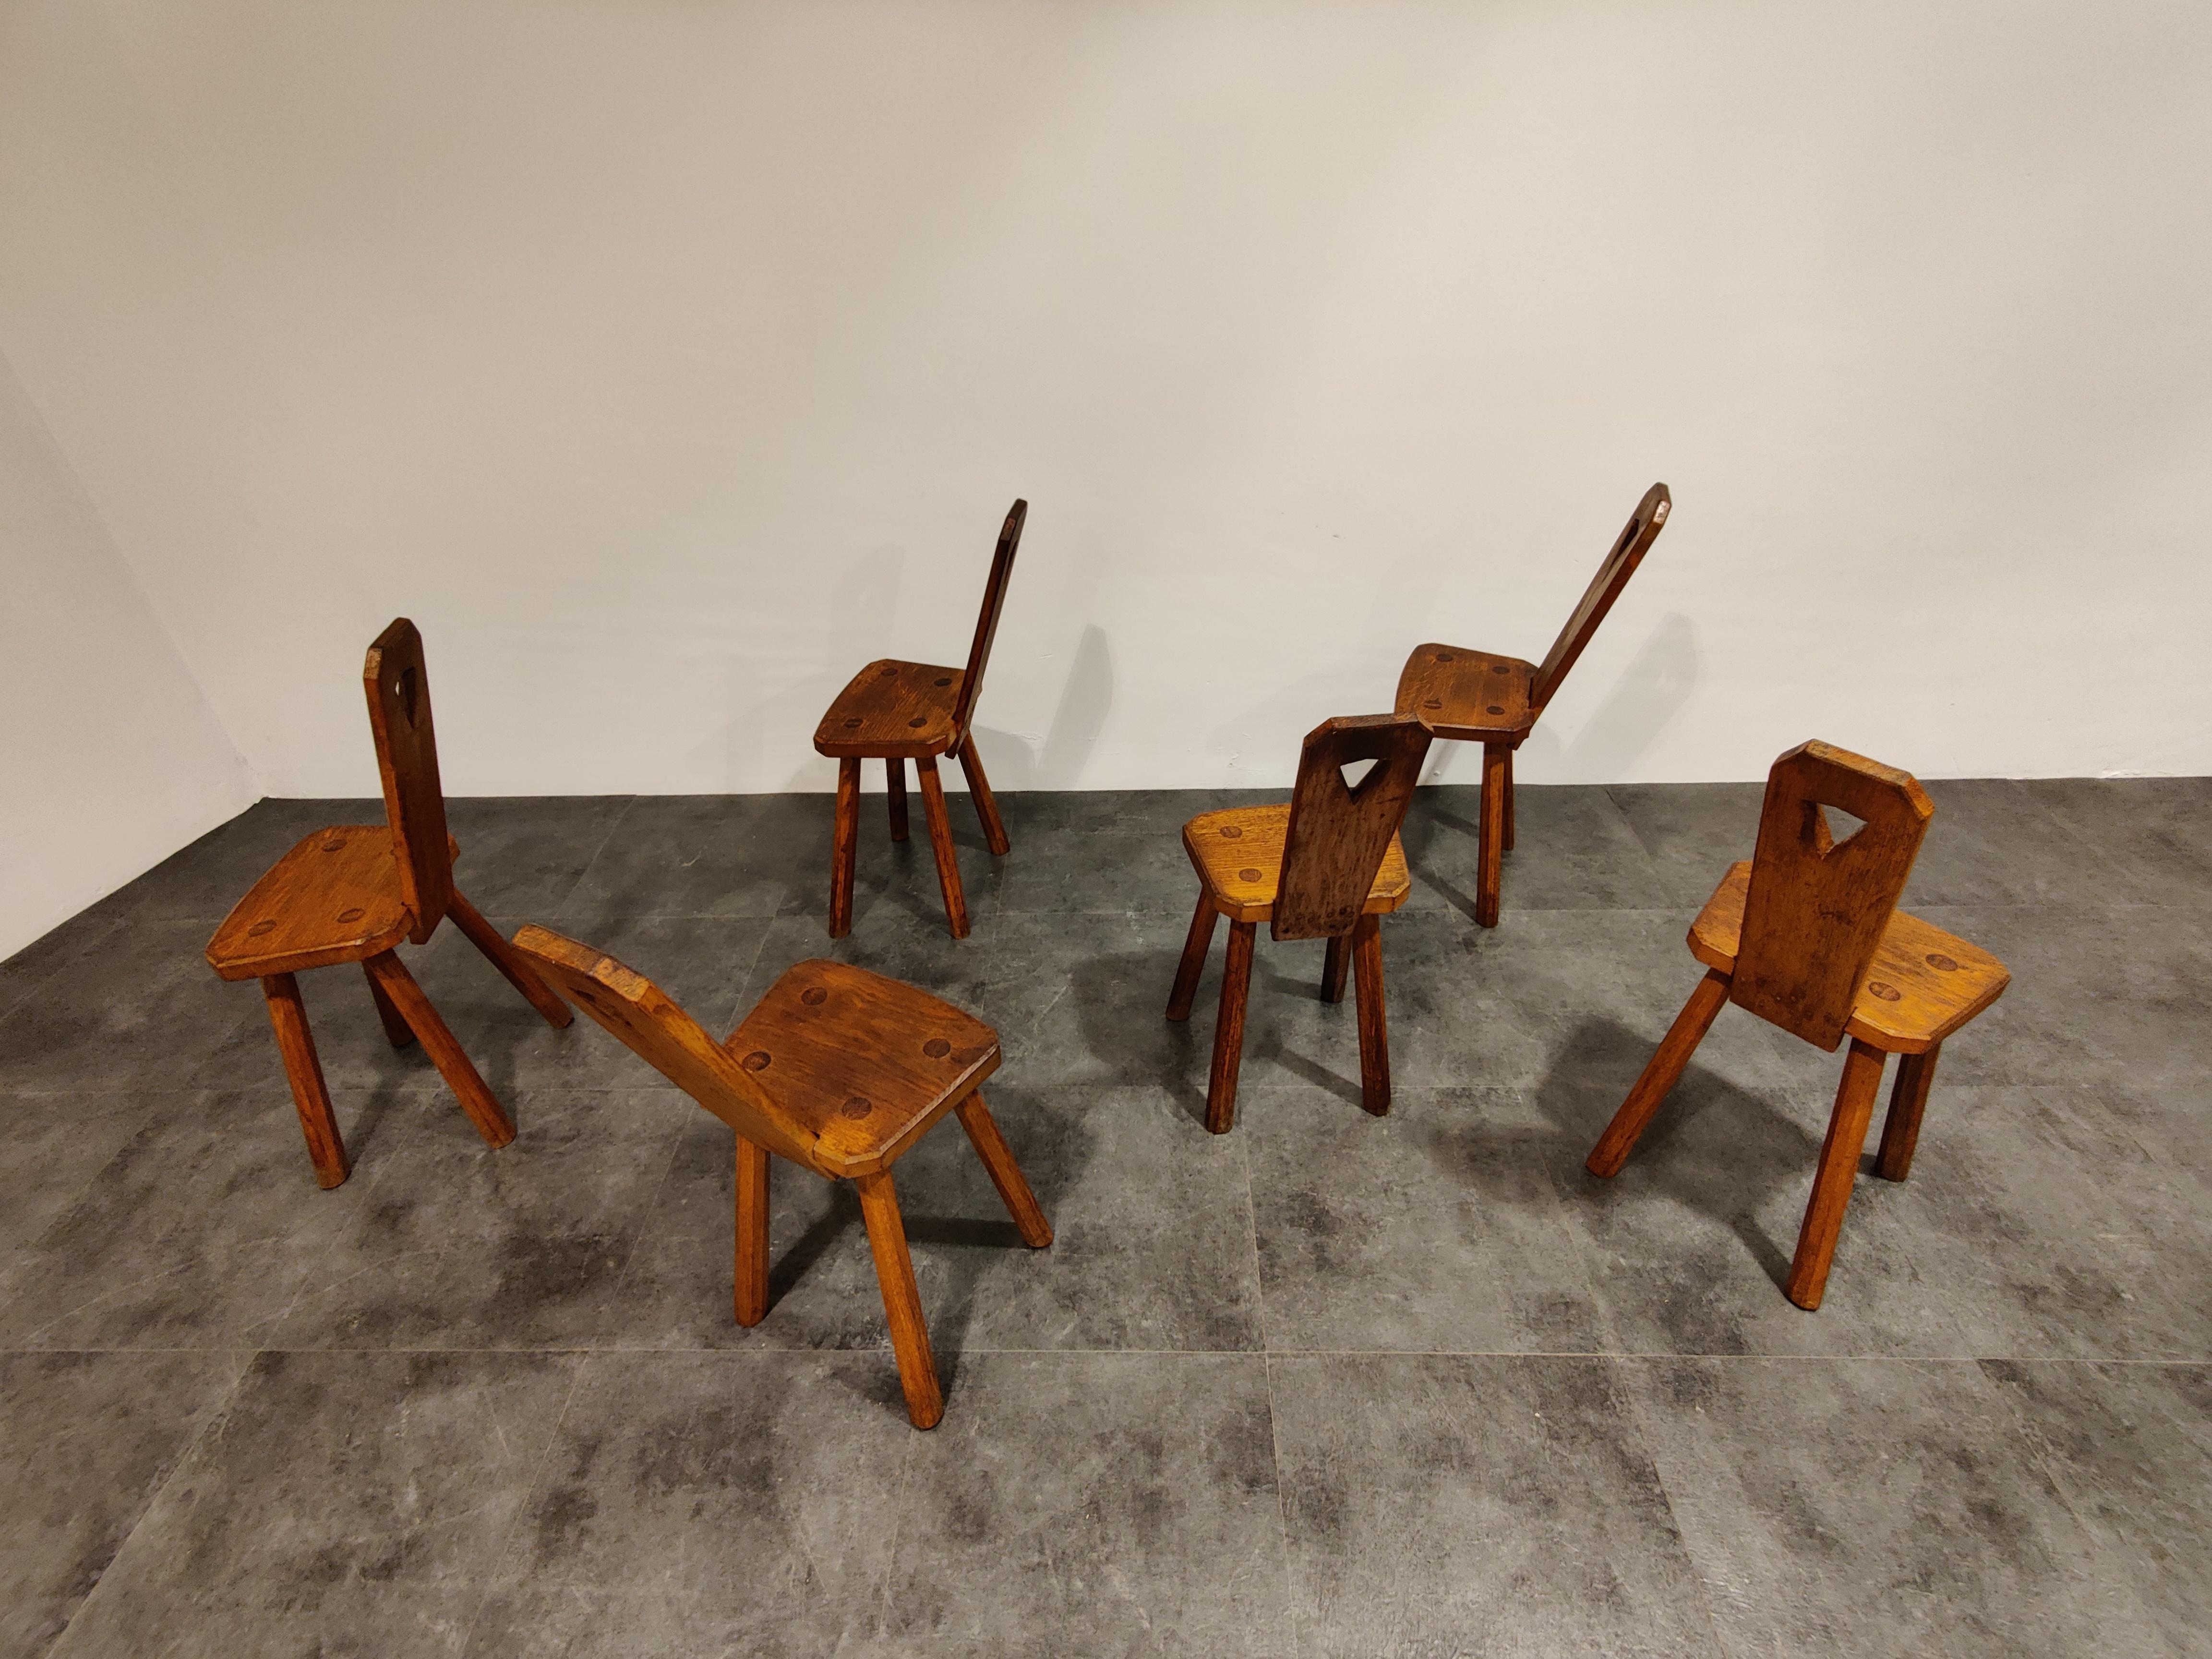 Beautiful handmade midcentury Brutalist dining chairs.

Primitive design but very decorative, made from oak.

Good original condition.

1950s, Belgium

Dimensions:
Width 32cm/12.59